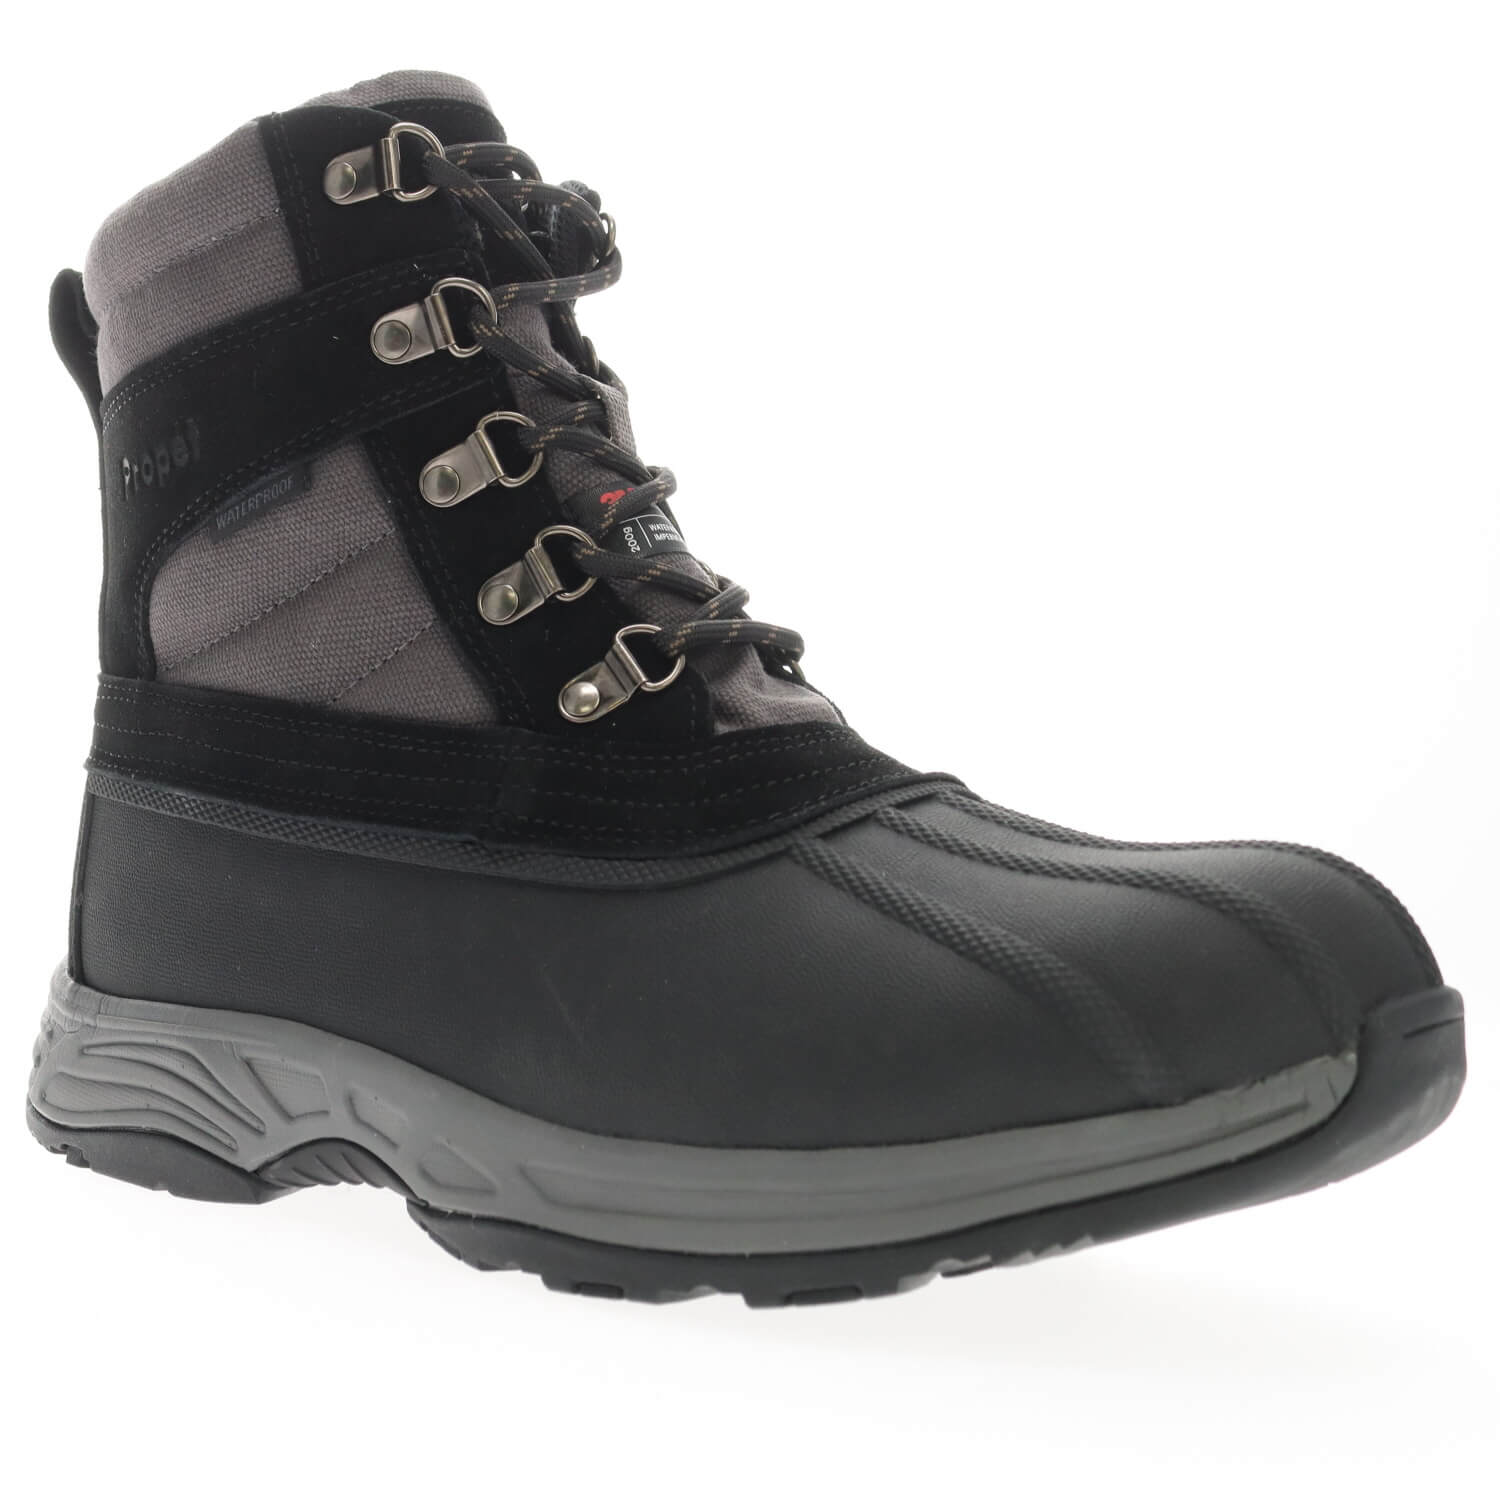 Propet Cortland MBA006C Waterproof 8 Hiking Boot - Double Depth For Orthotics - Extra Wide